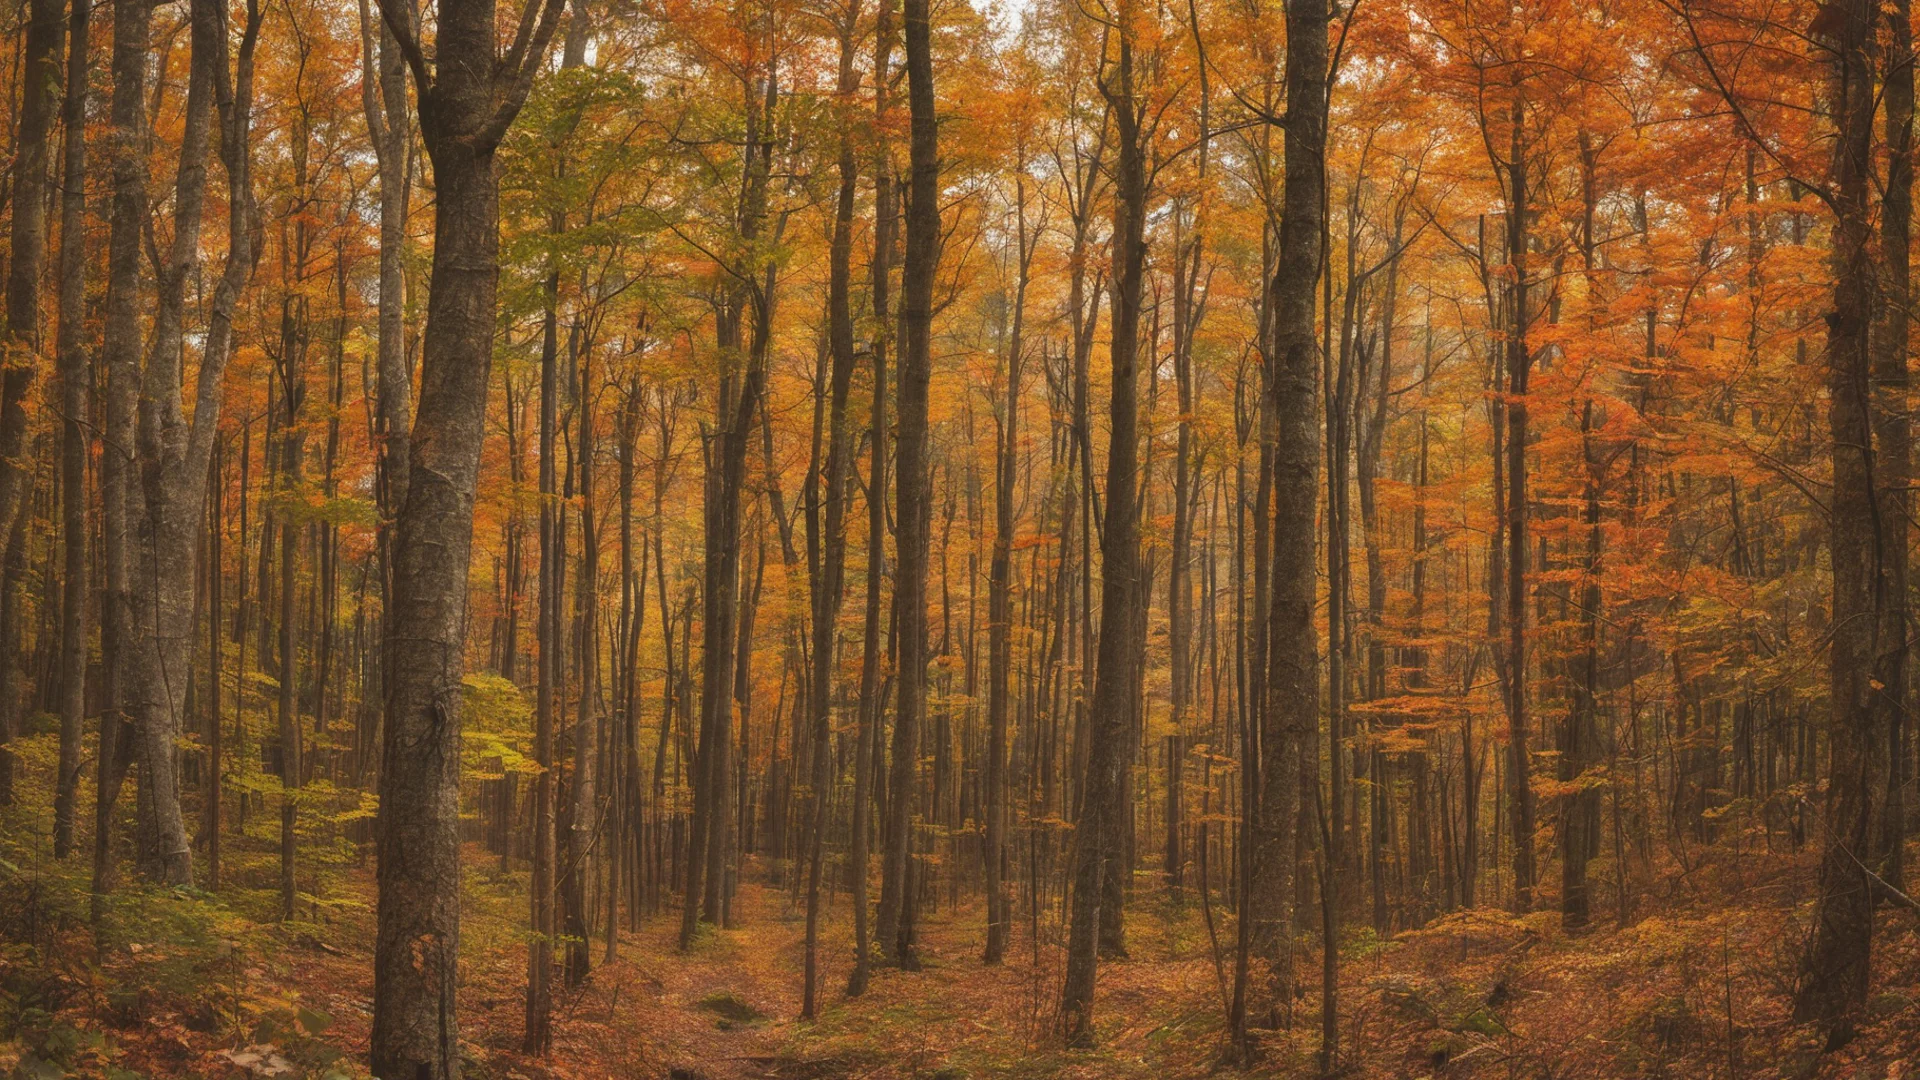 aifall forest in the mountains of virginia wide